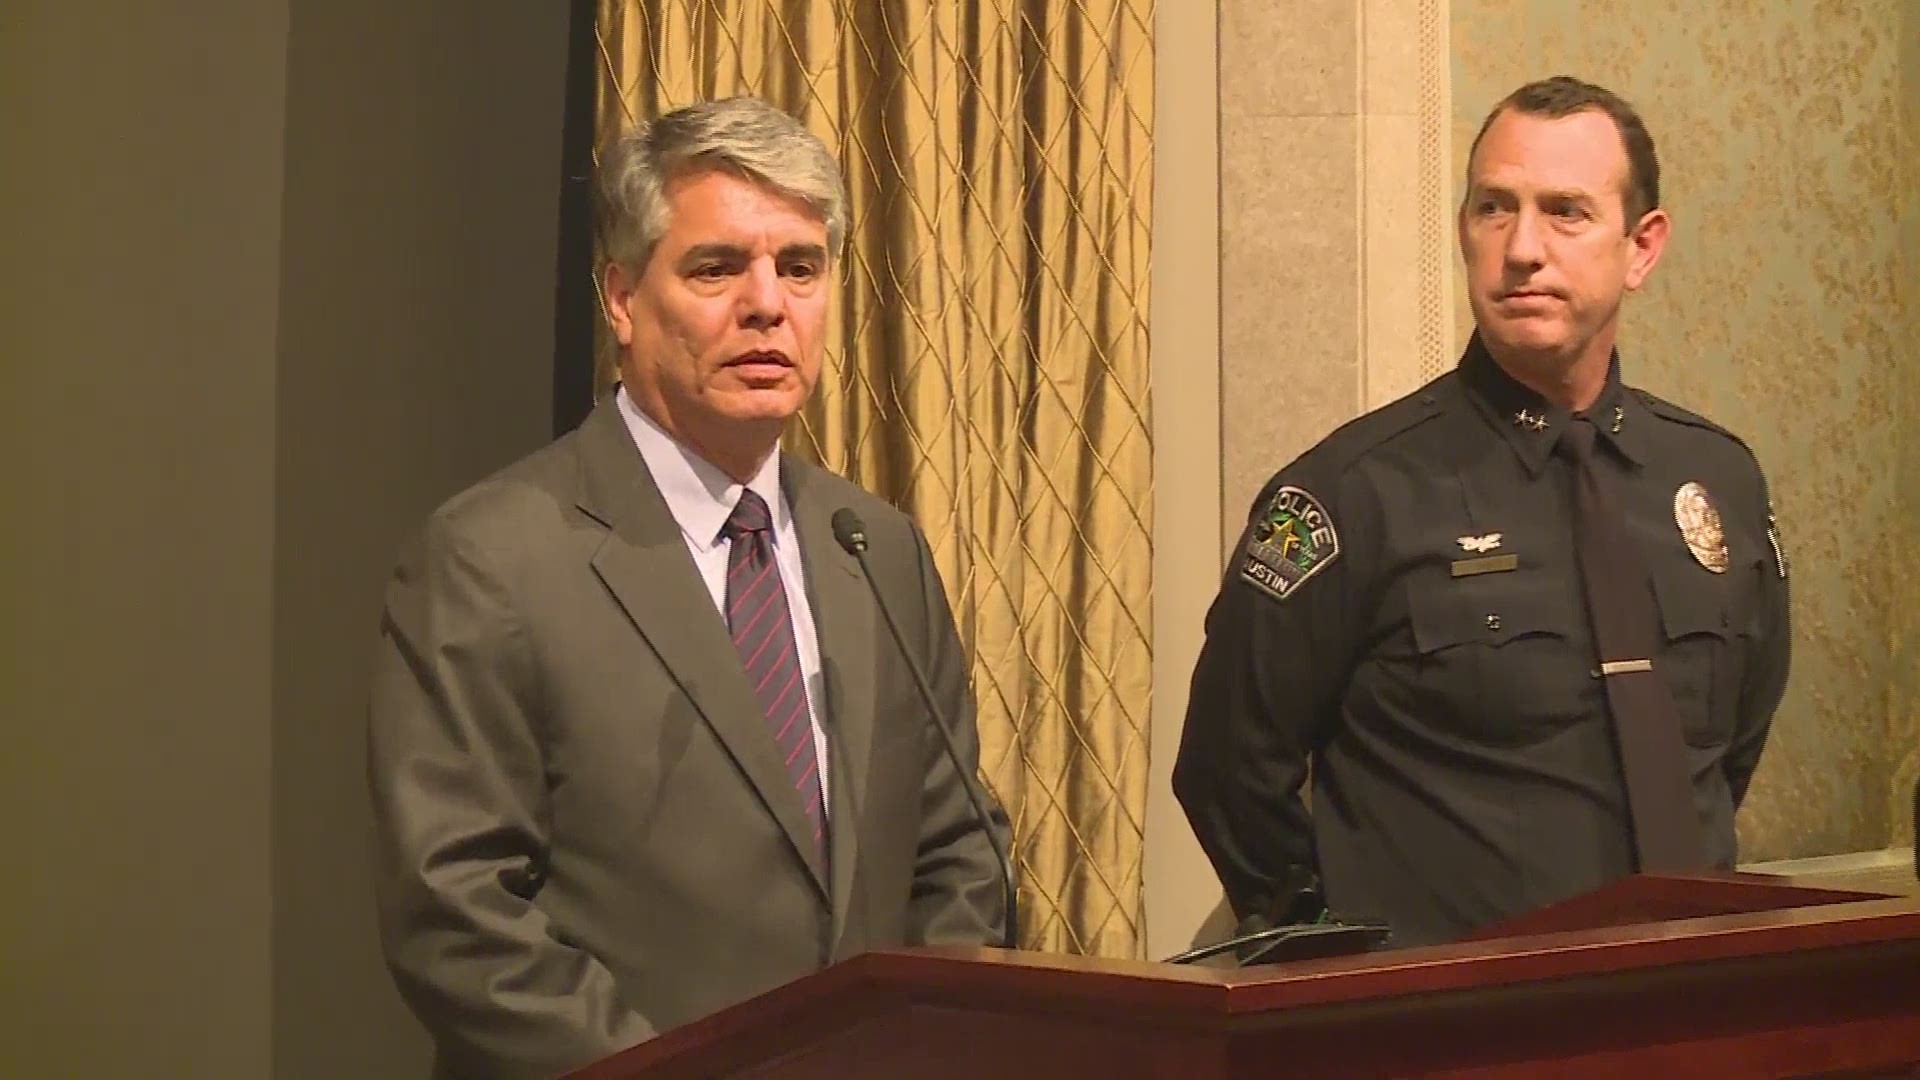 RAW VIDEO: UT press conference on Weiser homicide